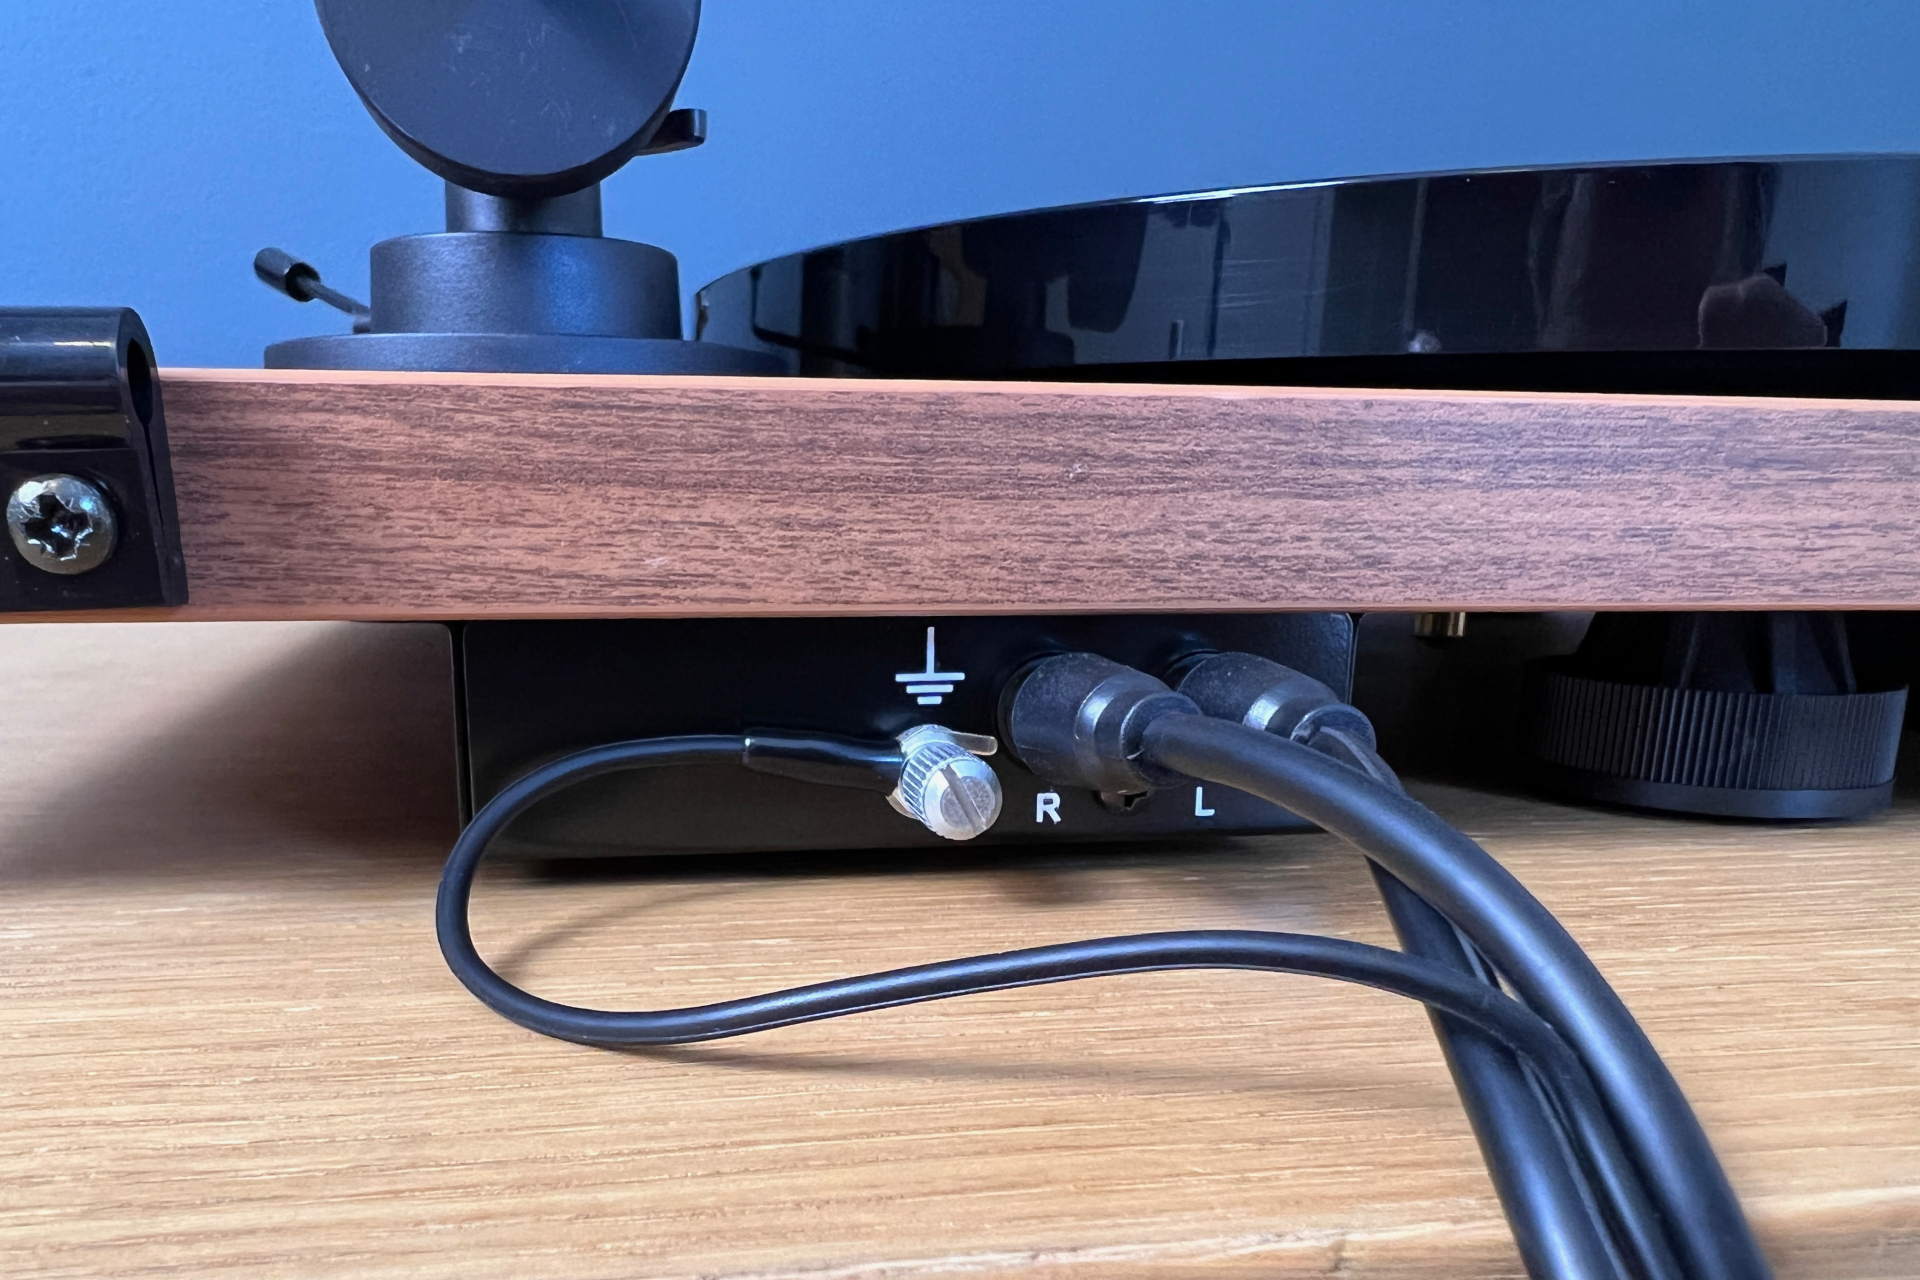 How to turntable to a Sonos speaker | Digital